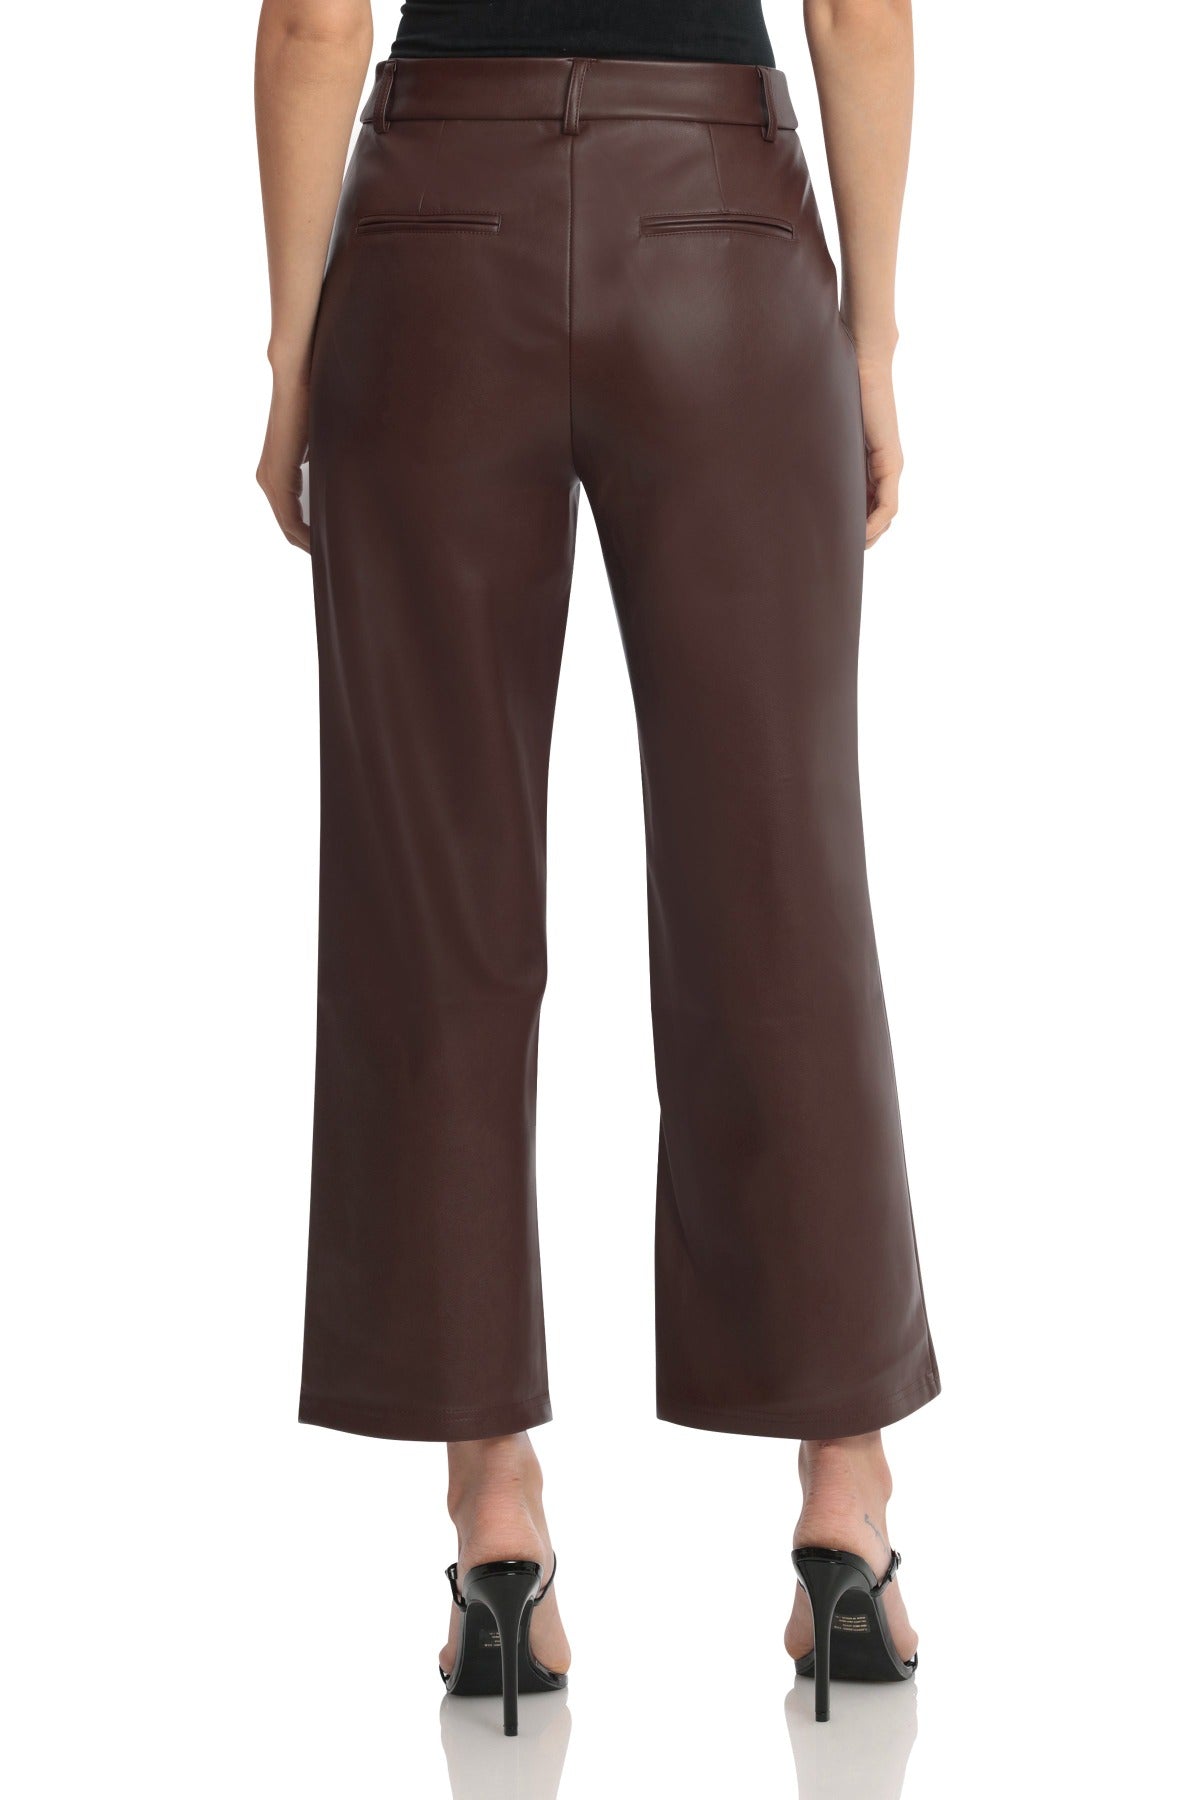 Faux Leather Seam-Front Straight Leg Trouser Pants Chocolate Brown - Women's Flattering Work Appropriate Bottoms Designer Fashion Pant